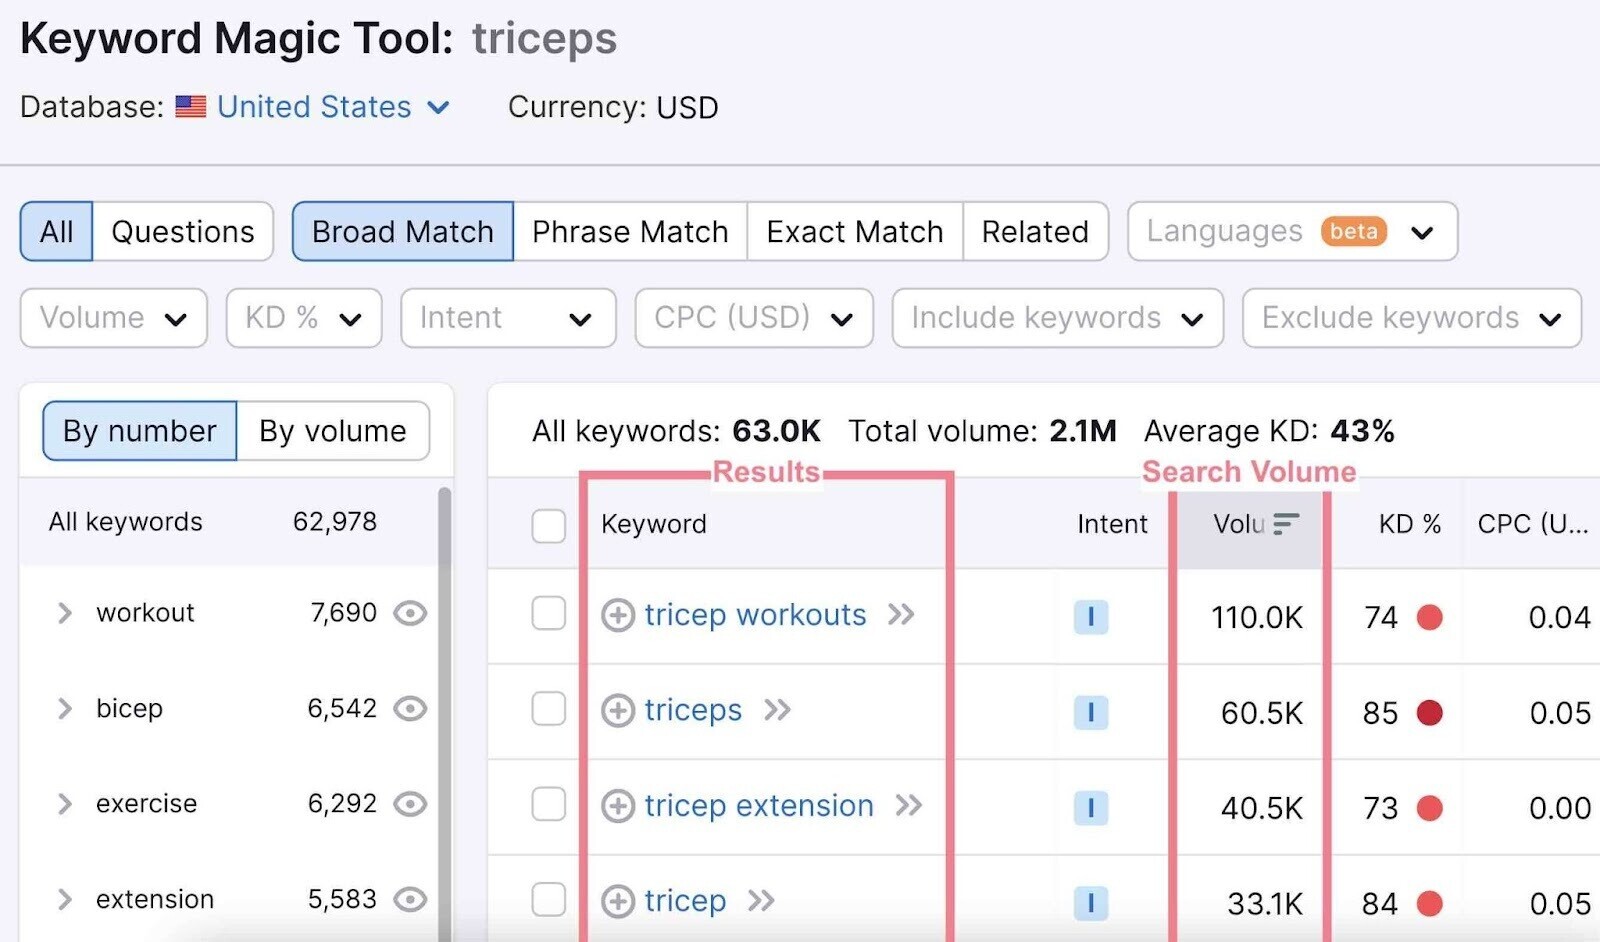 Results and volume in Keyword Magic Tool